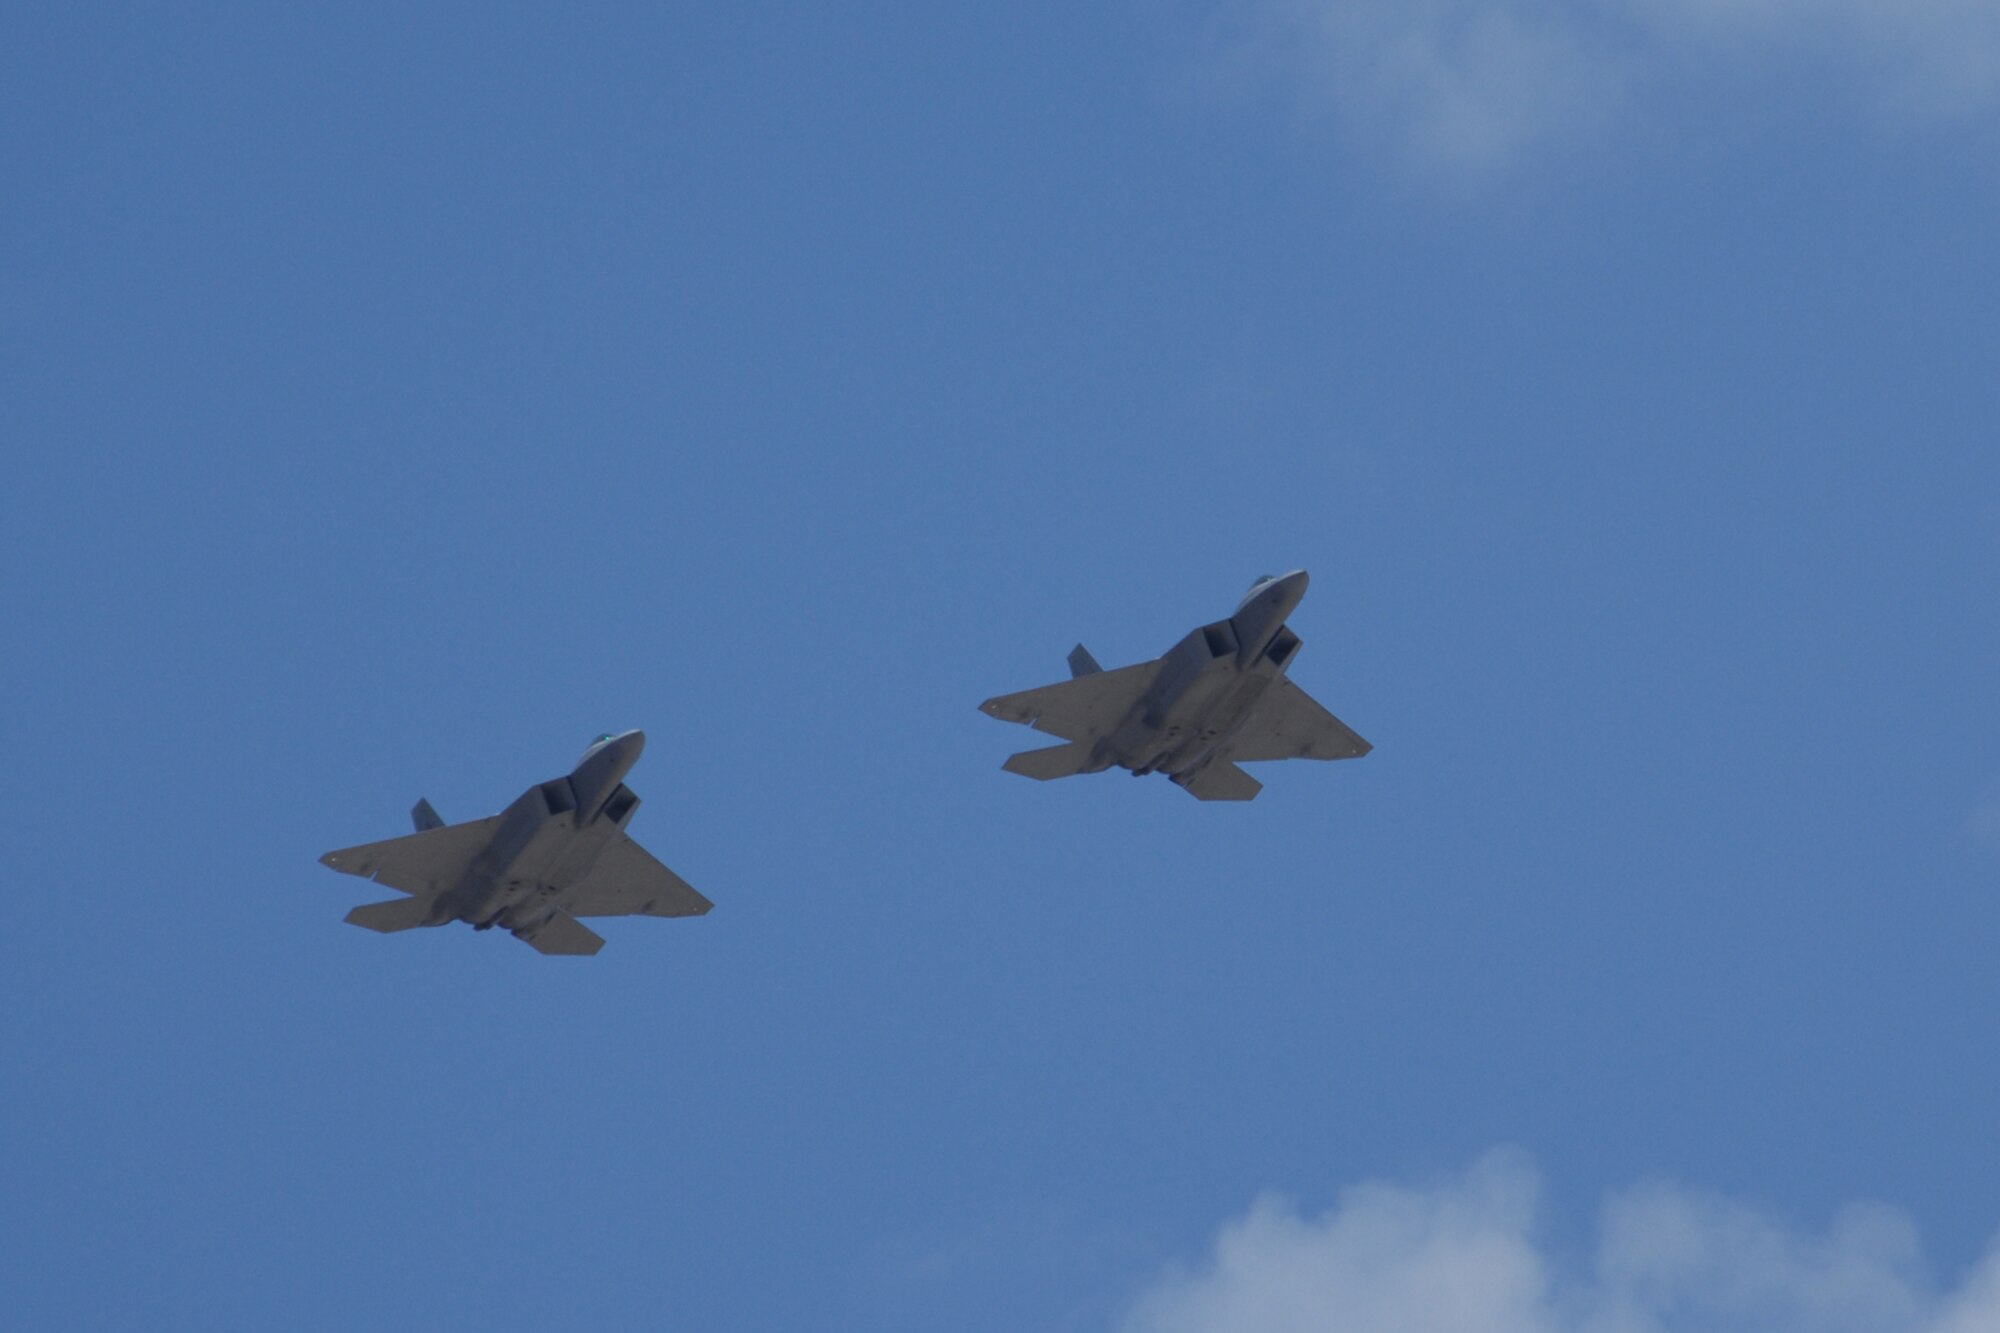 Col. Jeff Harrigian, 49th Fighter Wing commander, and Lt. Col. Mike Hernandez, 7th Fighter Squadron commander, fly a pair of F-22A Raptors over the skies of Holloman Air Force Base, N.M., June 2. The jets are the first two Holloman-tailed F-22s to arrive on base. Prior to landing, the jets flew over the Tularosa Basin, allowing the local community a chance to witness the future of Holloman Air Force Base. (U.S. Air Force photo/Airman 1st Class Jamal D. Sutter)